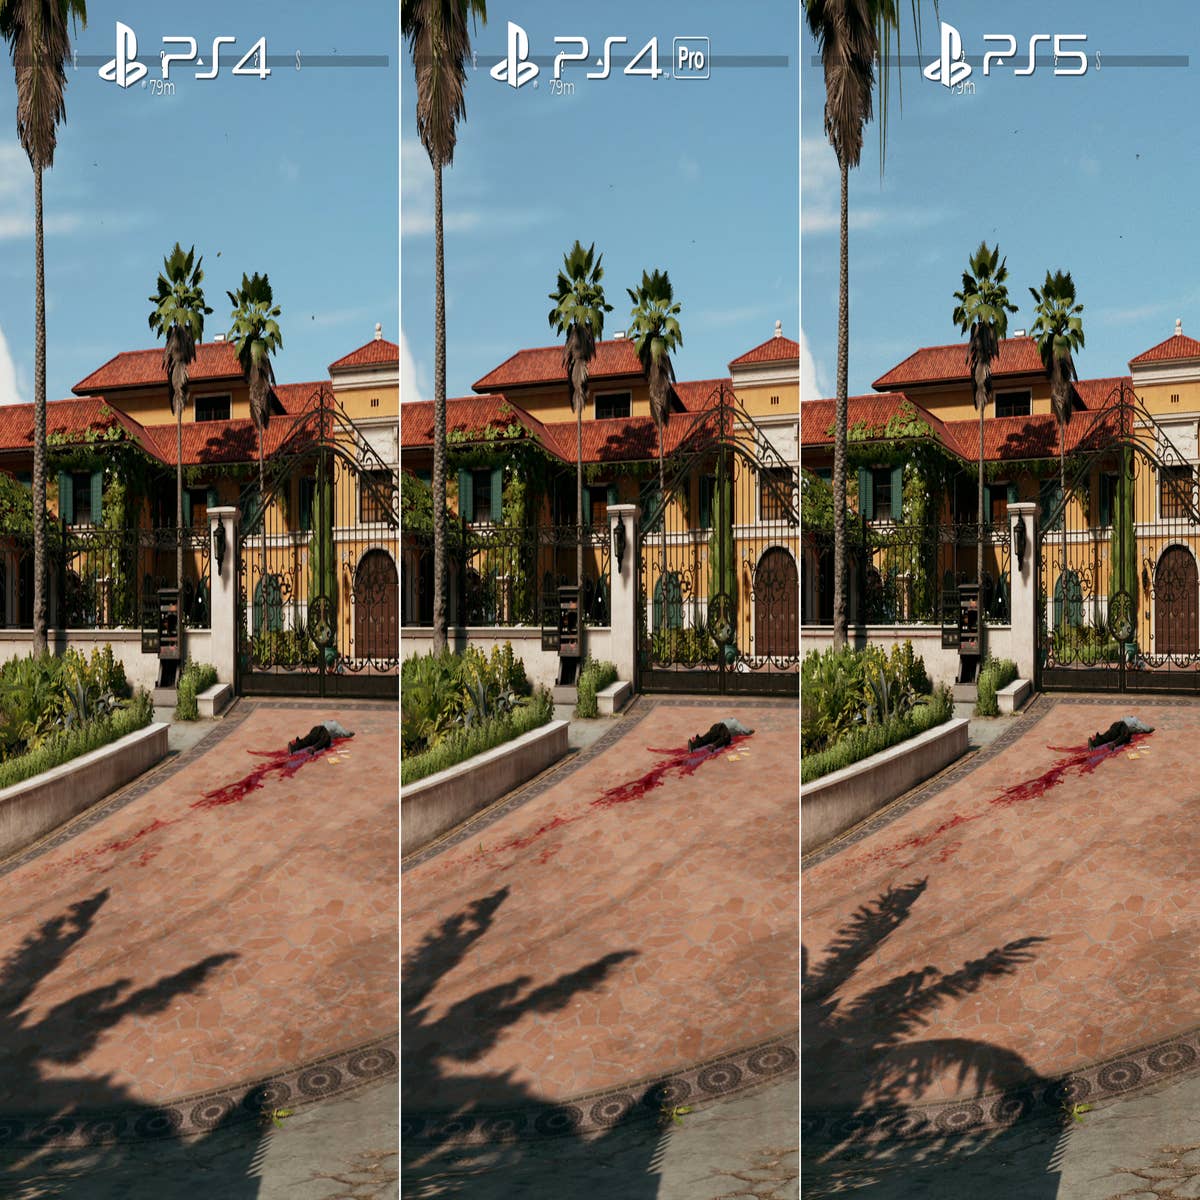 Dead Island 2 Player Compares Game Locations with Real World LA